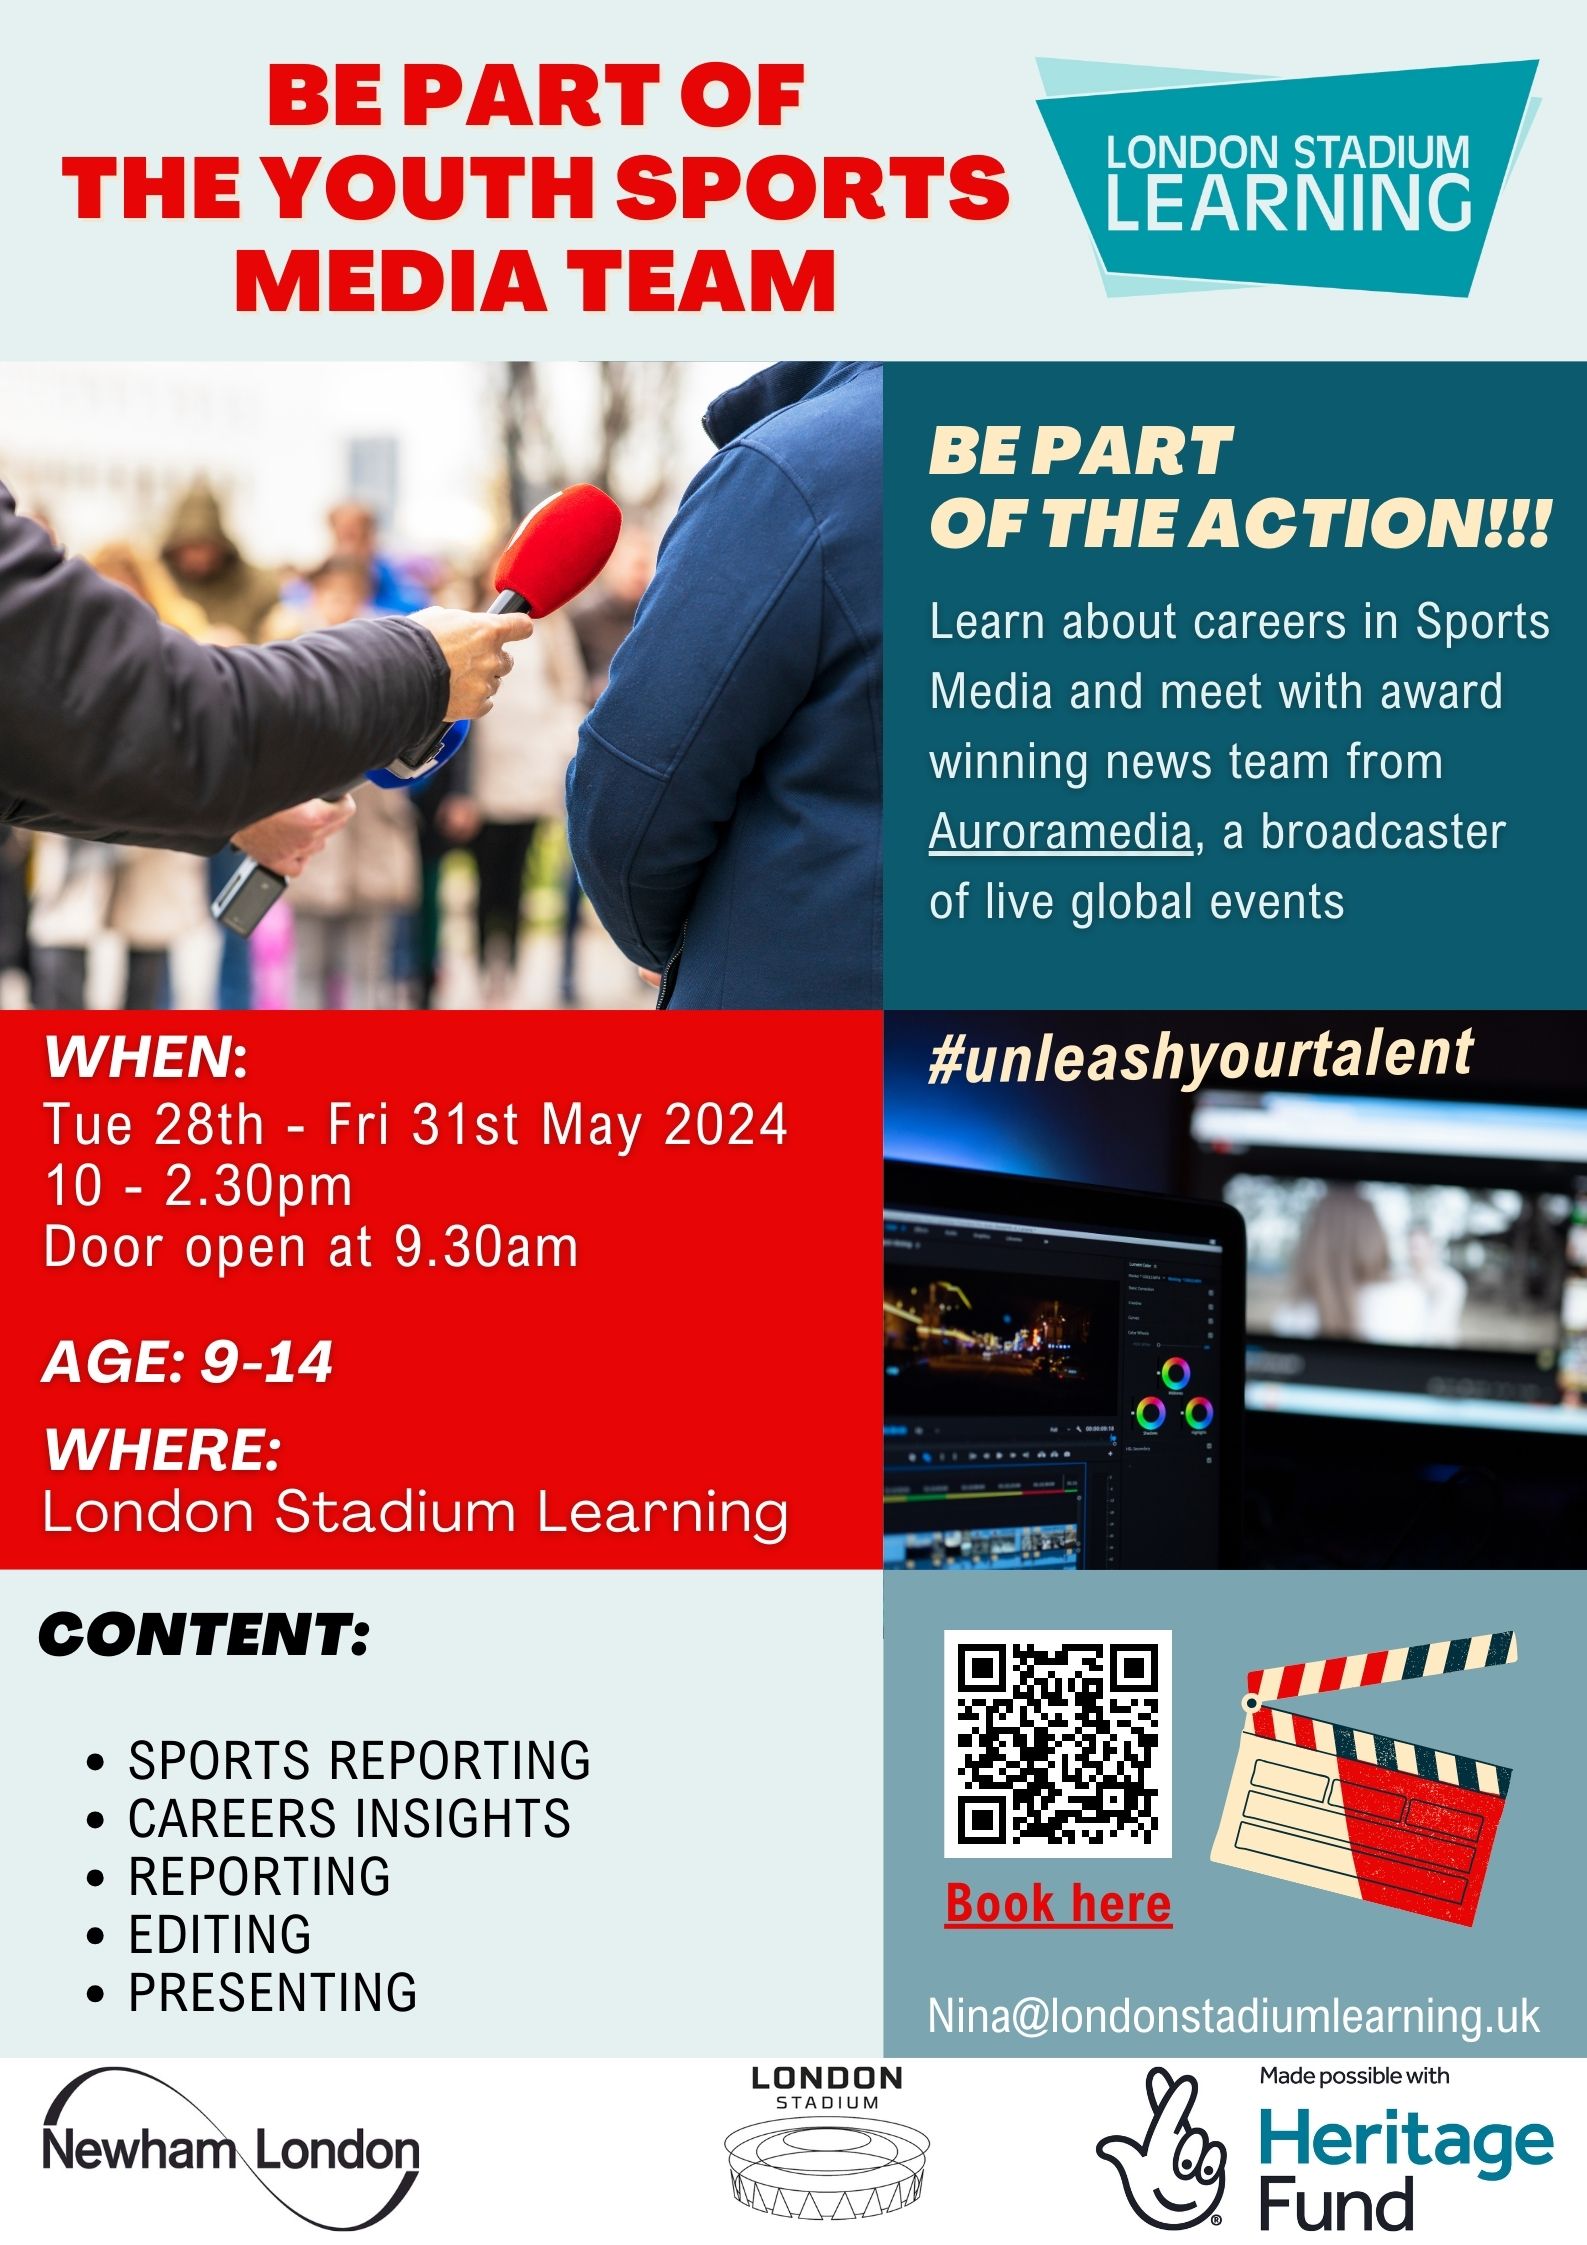 Be part of the action, summer holiday course